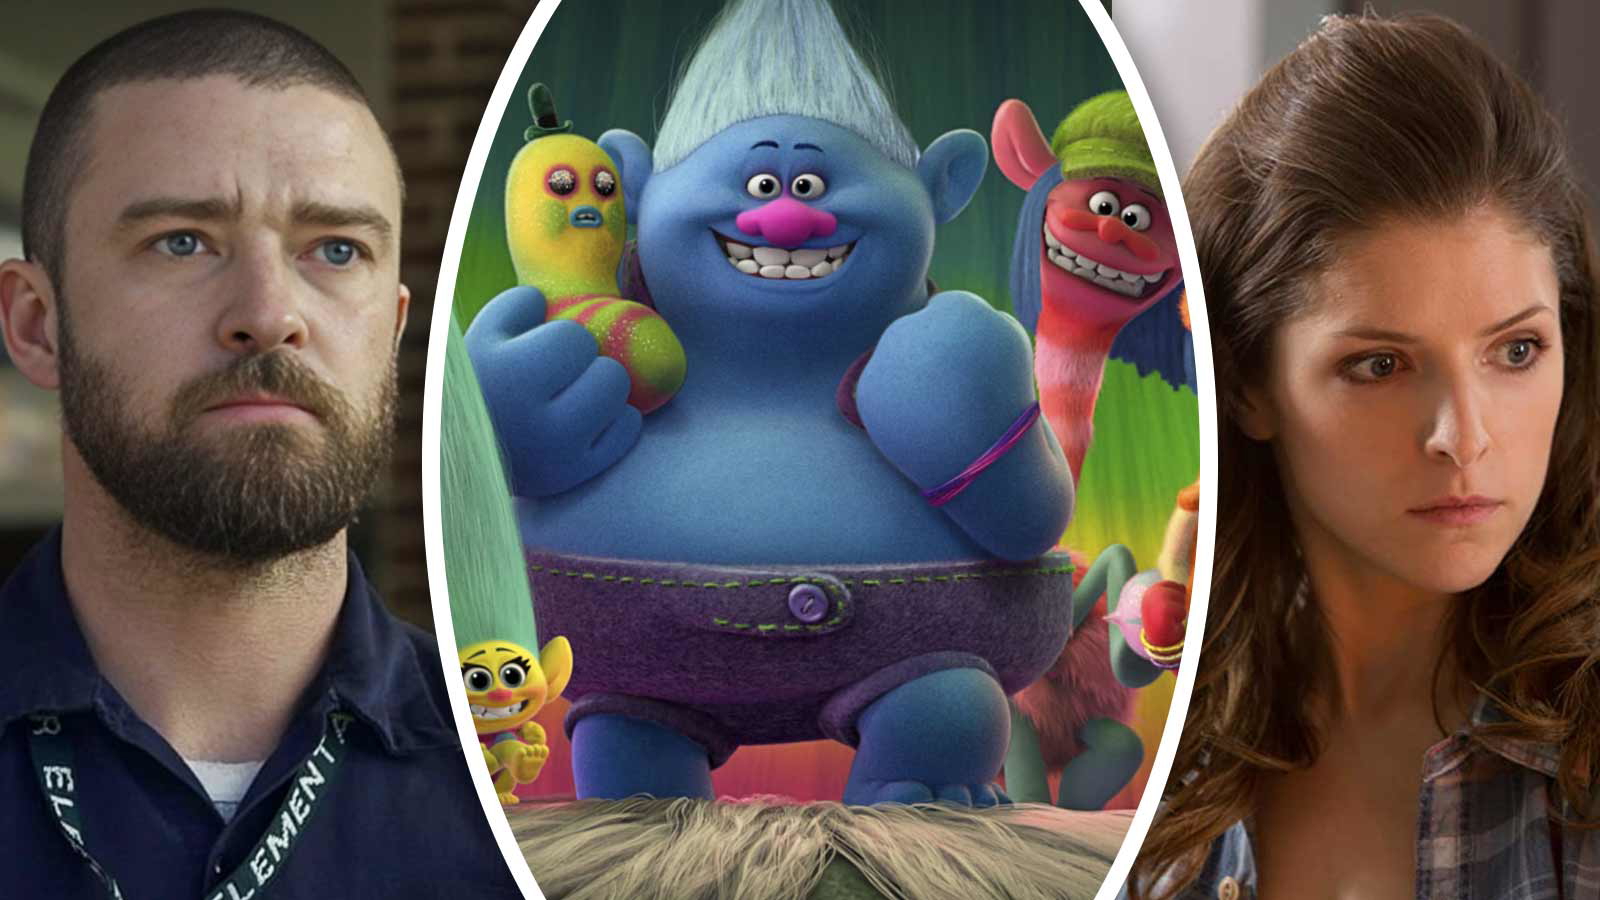 “We kept talking over each other”: Justin Timberlake and Anna Kendrick’s Unstoppable Rapport on the Trolls Movies Quickly Became a Nightmare For the Producers